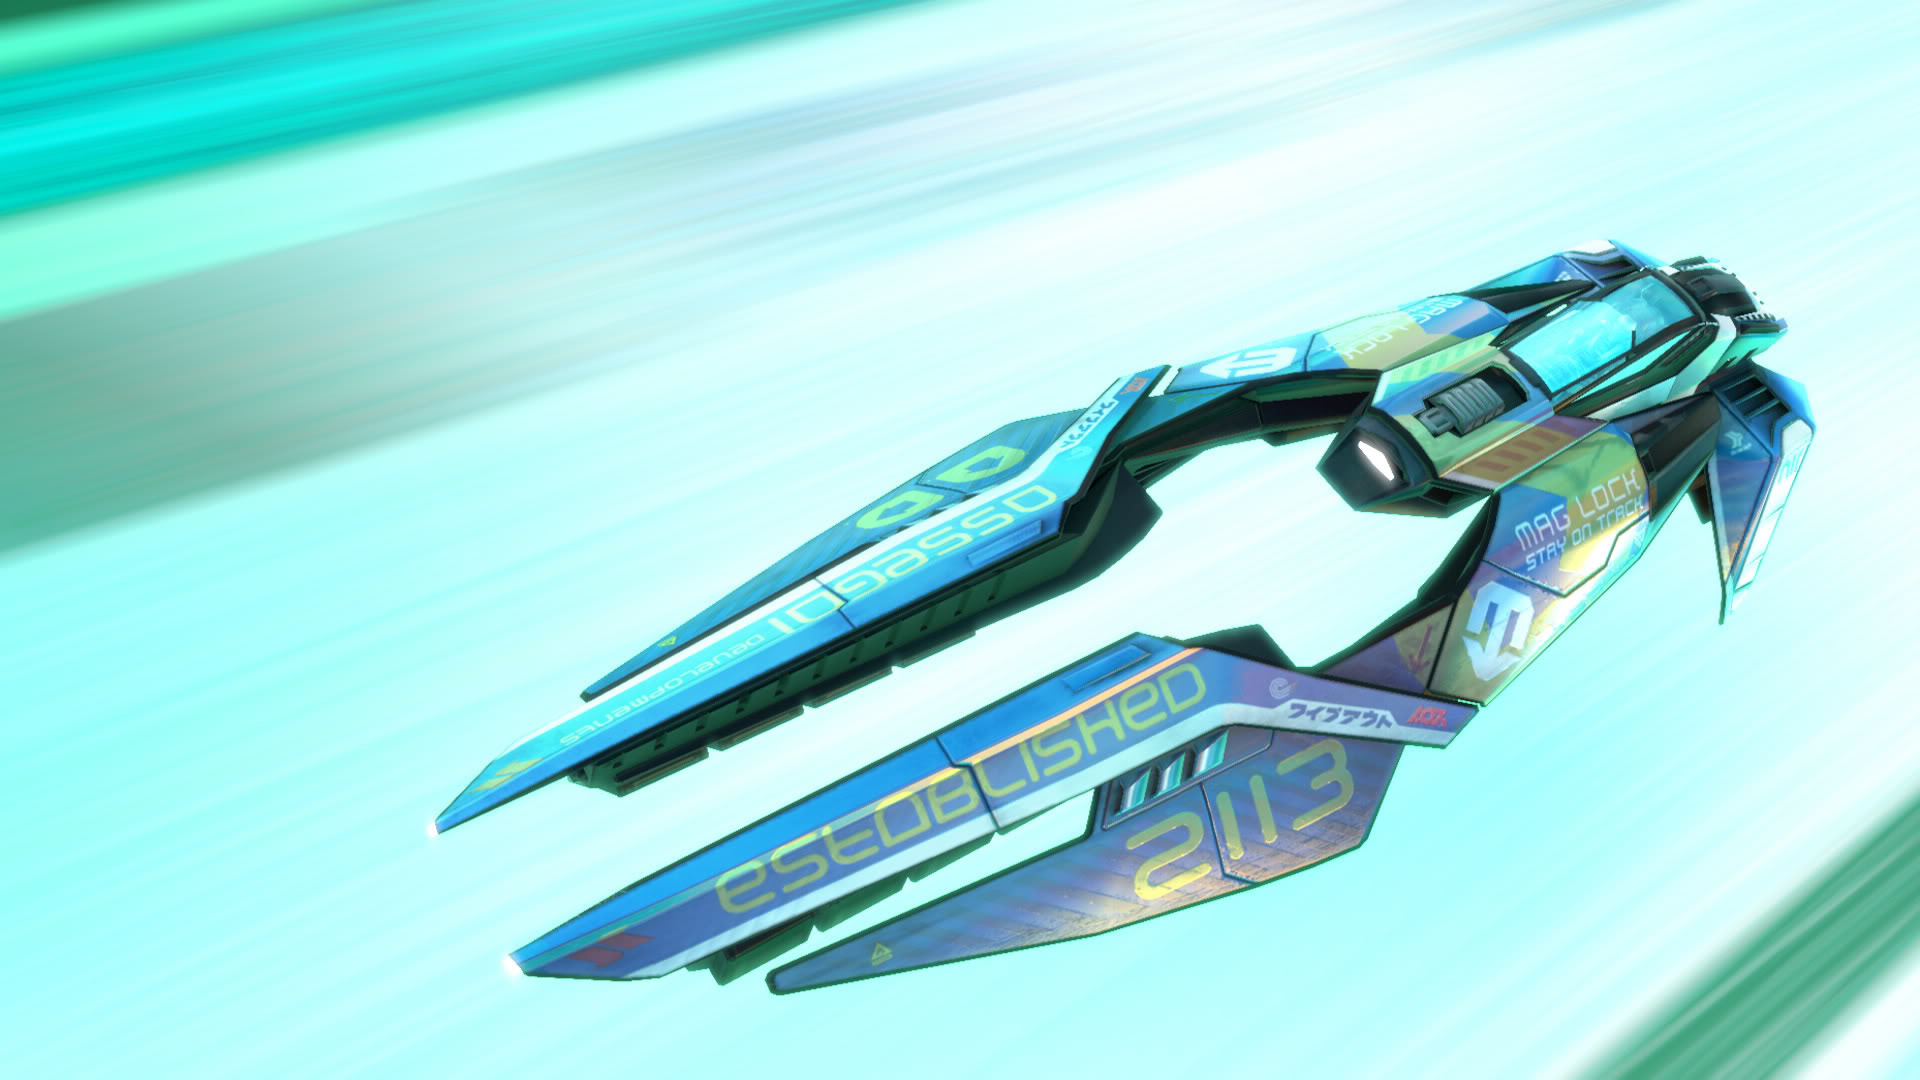 wipeout hd fury all ships